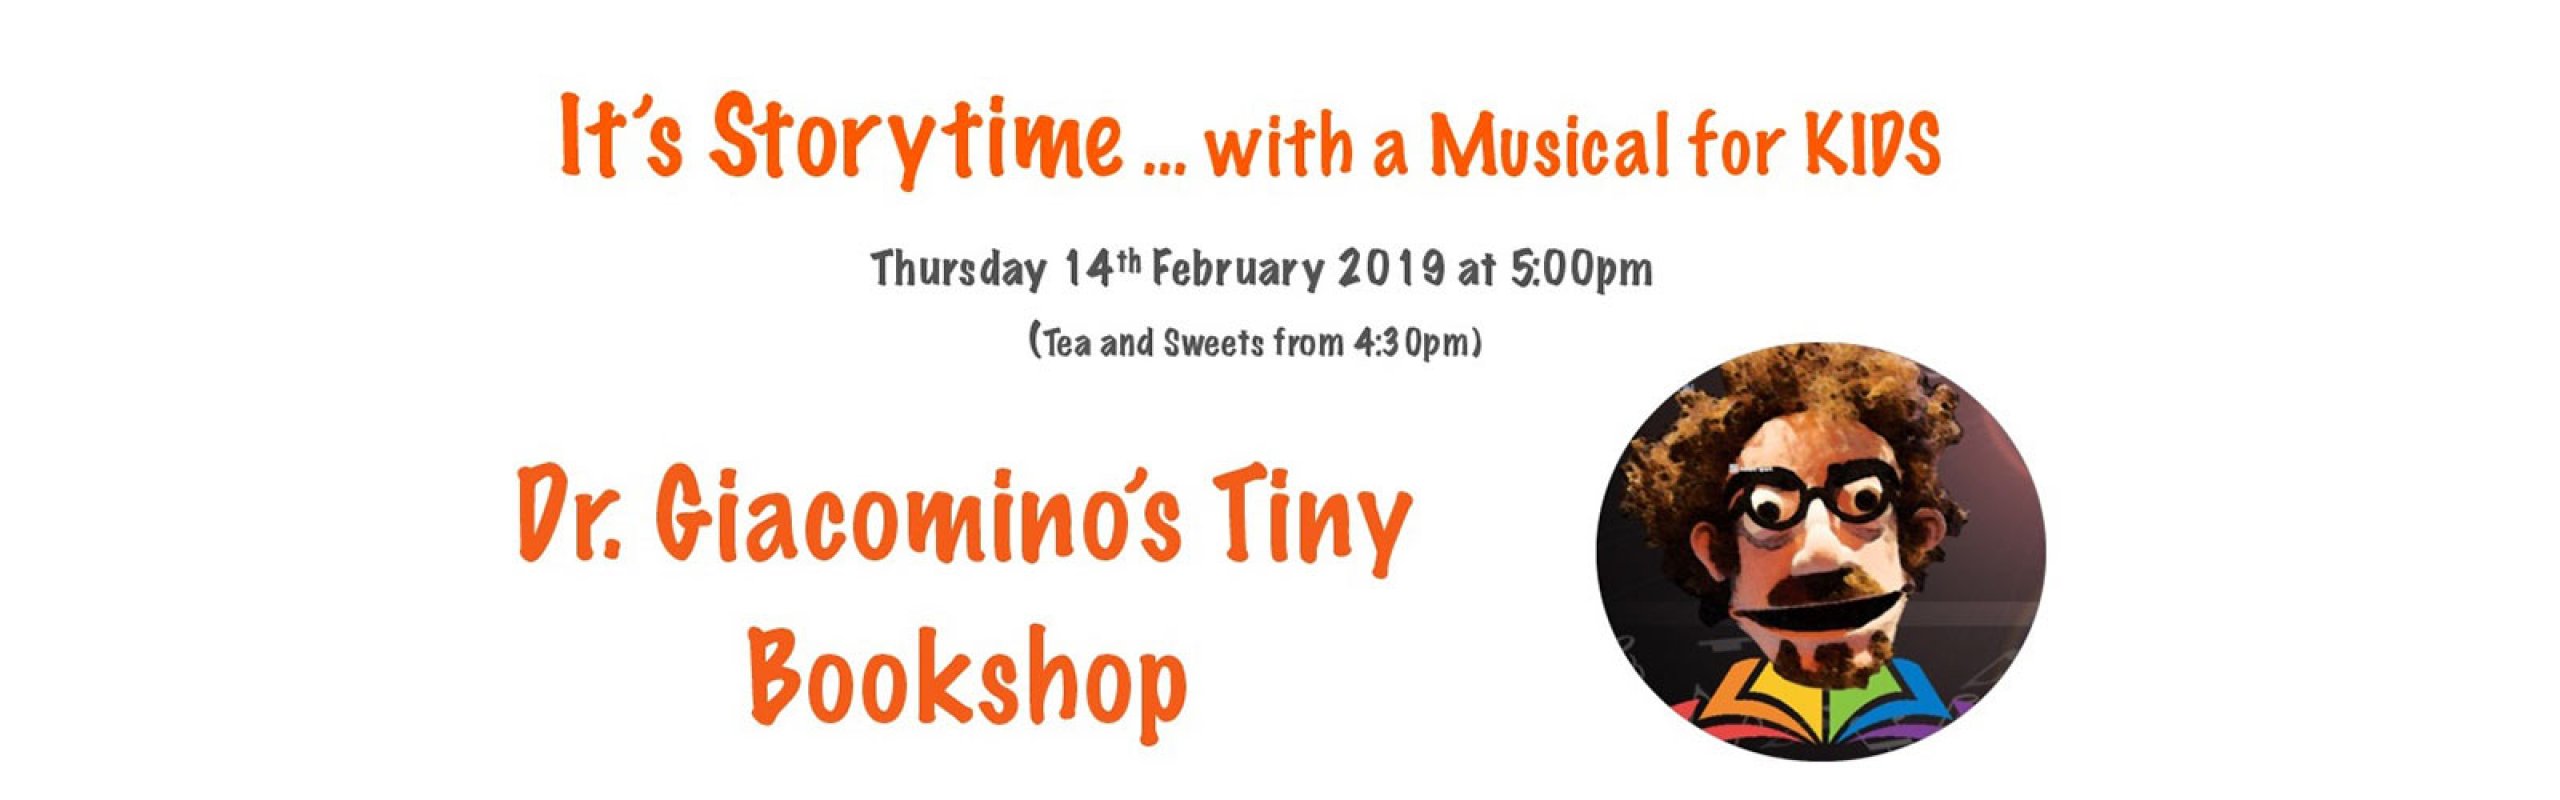 It's Storytime...with a Musical for Kids: Dr. Giacomino’s Tiny Bookshop